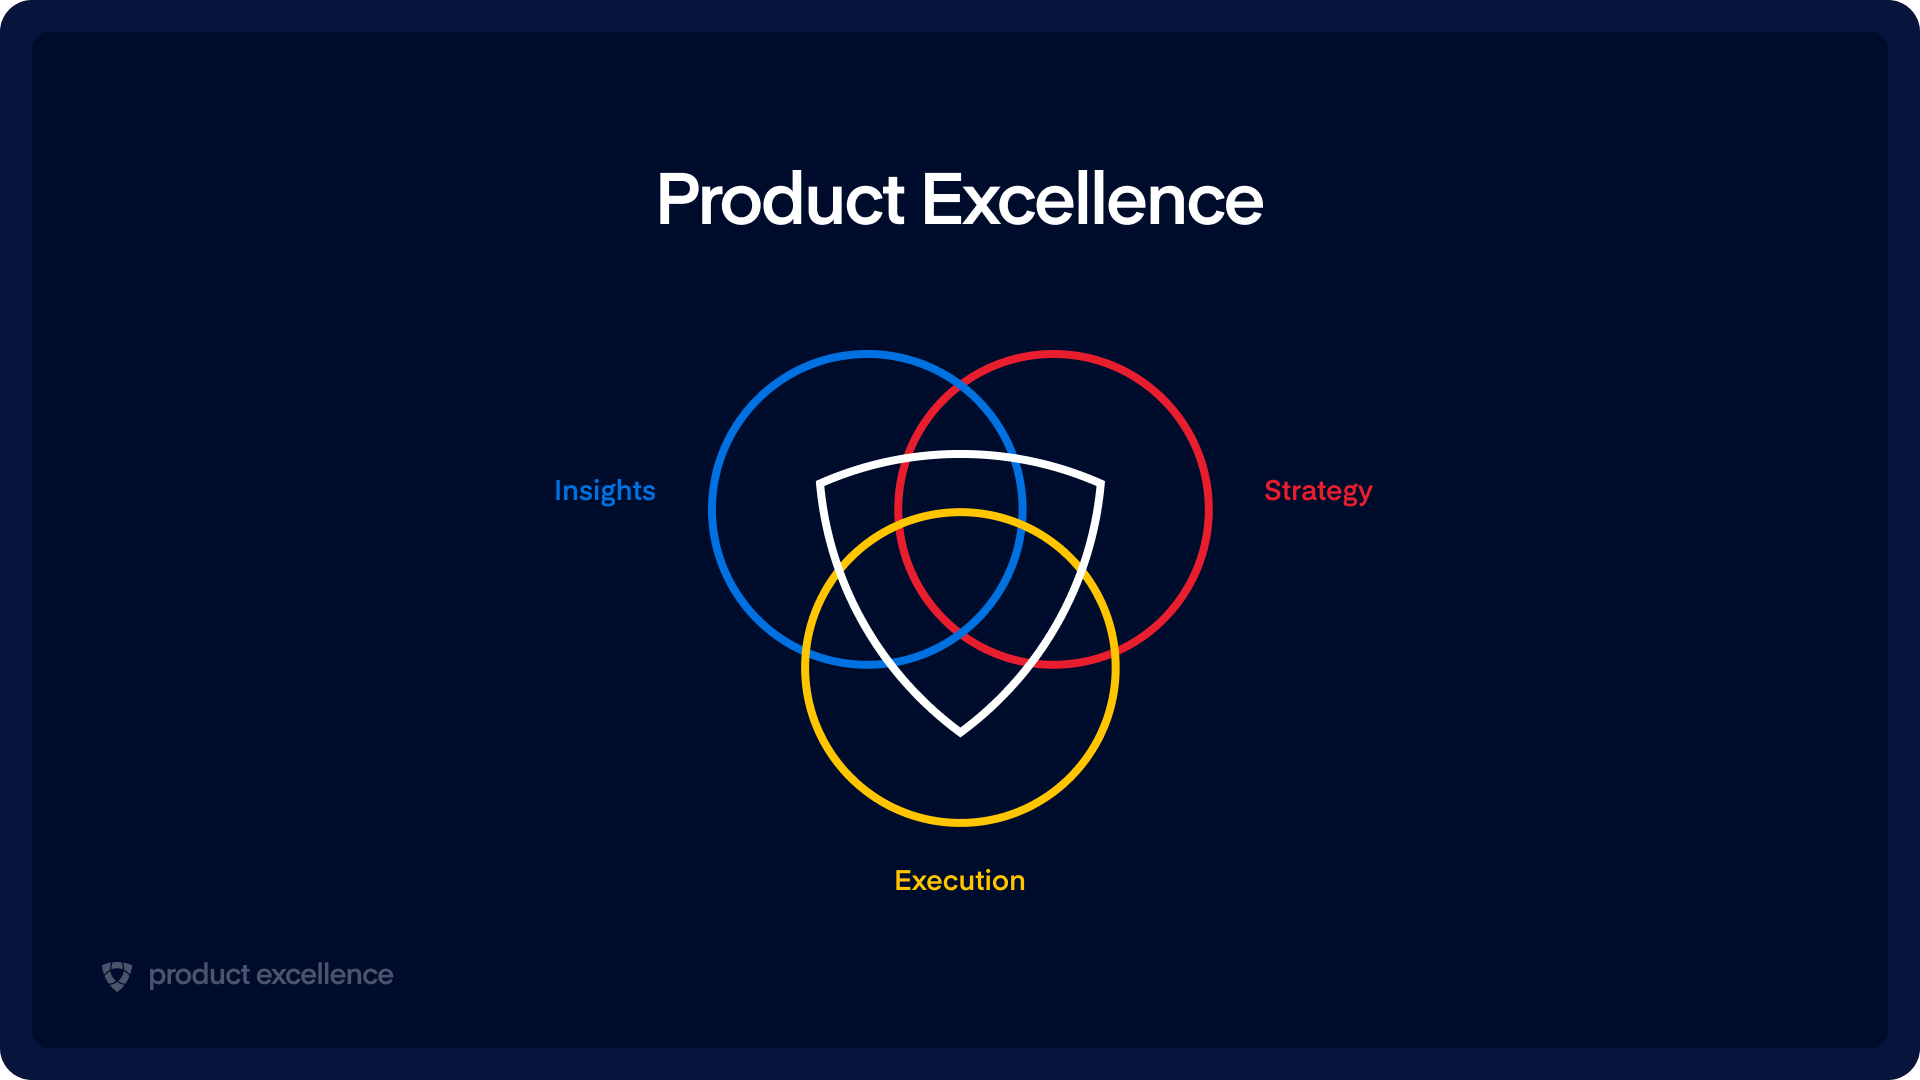 Product Excellence | Insights, strategy, execution